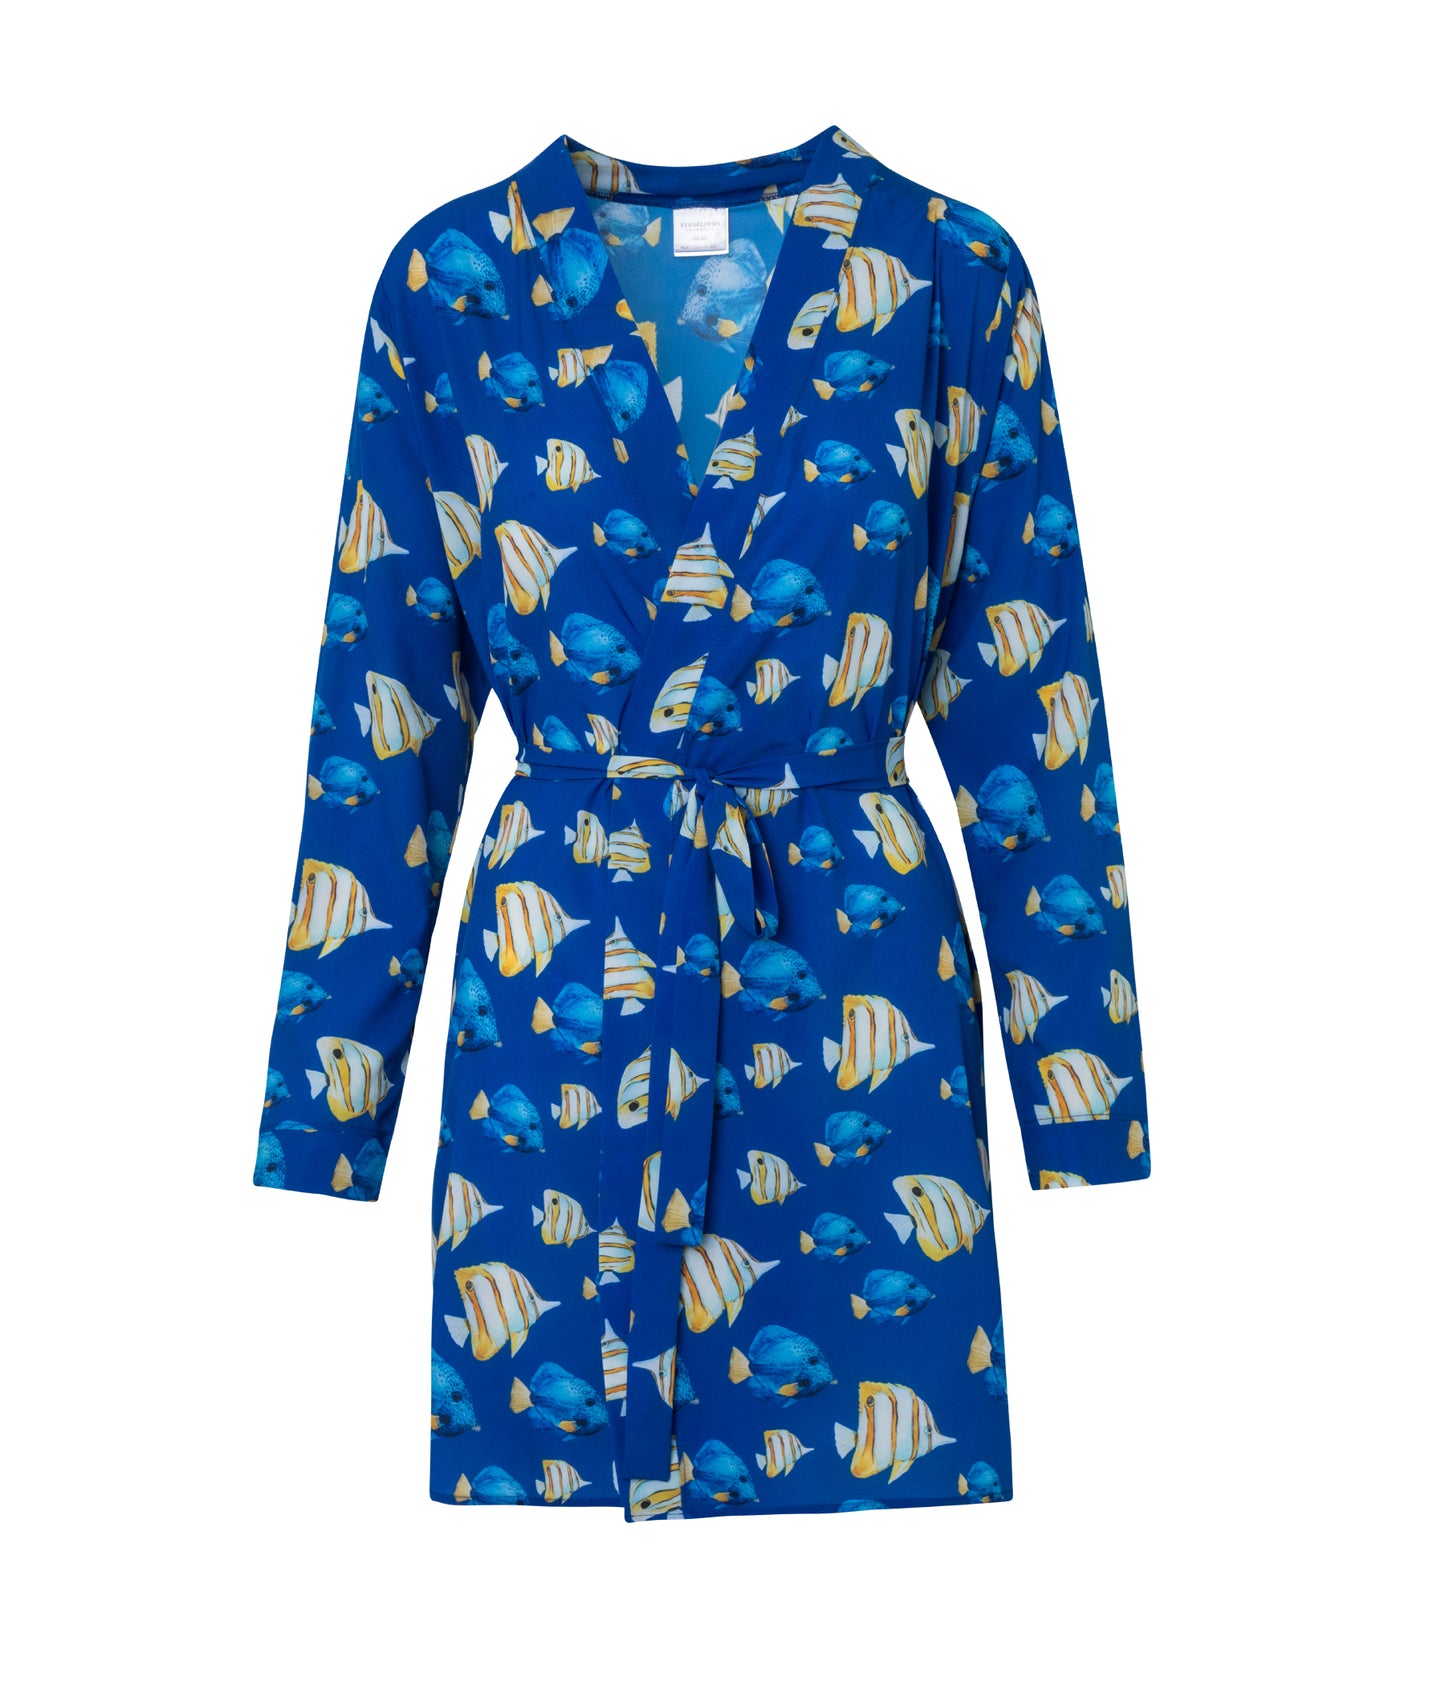 Verdelimon - Cover Up - San Juan - Printed - Bright Blue Fish - Front